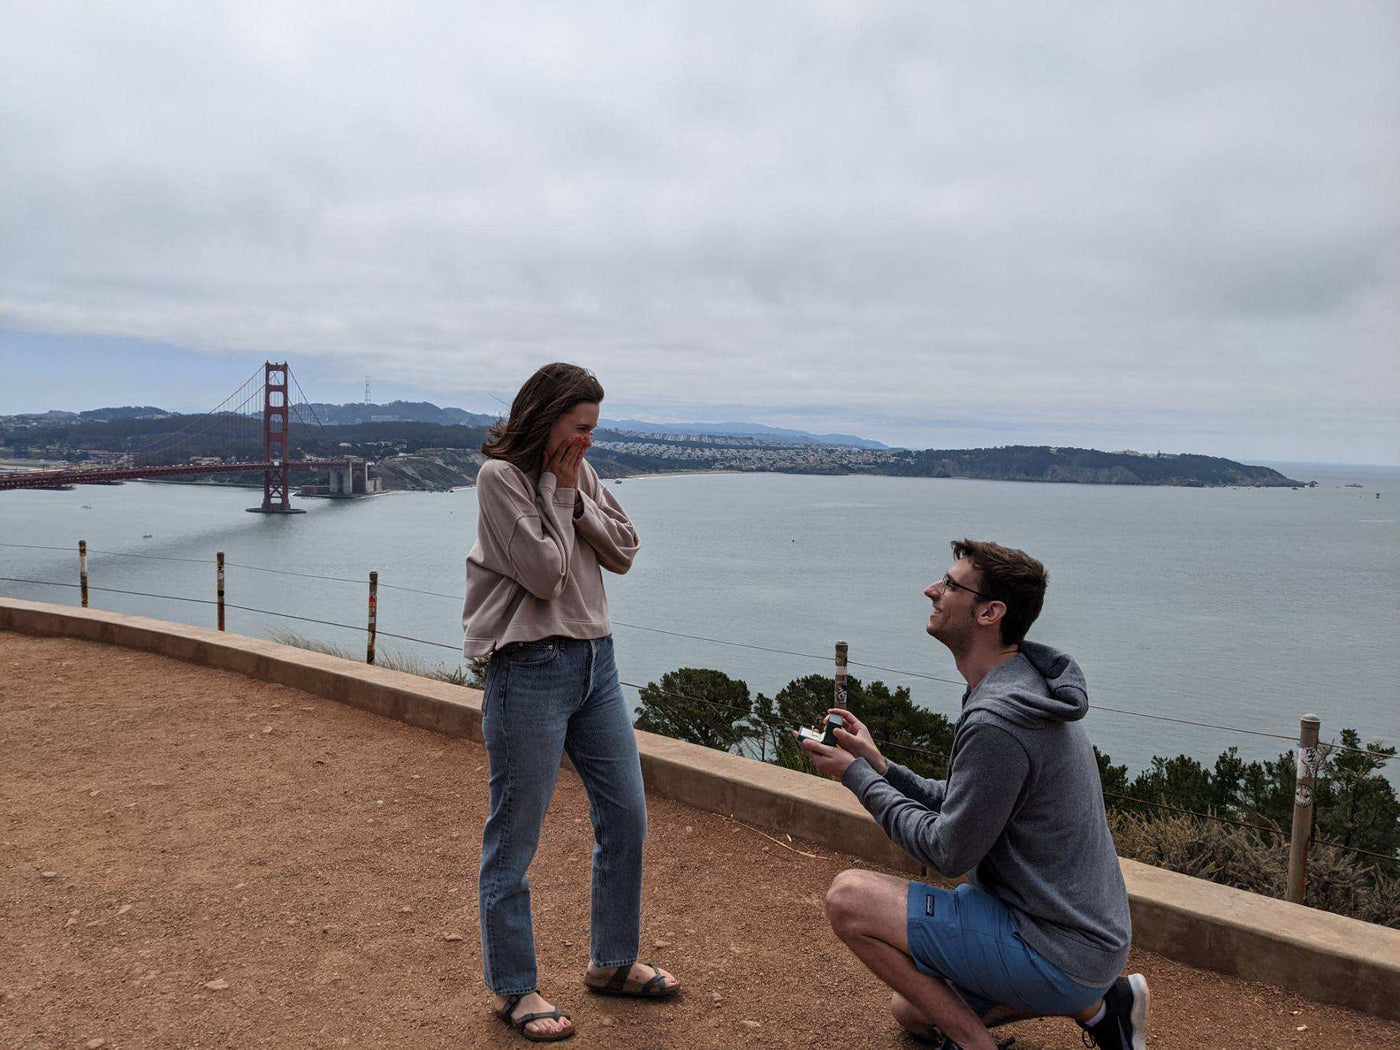 Dylan Proposes to Kathleen with a Henne Engagement Ring While Overlooking the Golden Gate Bridge